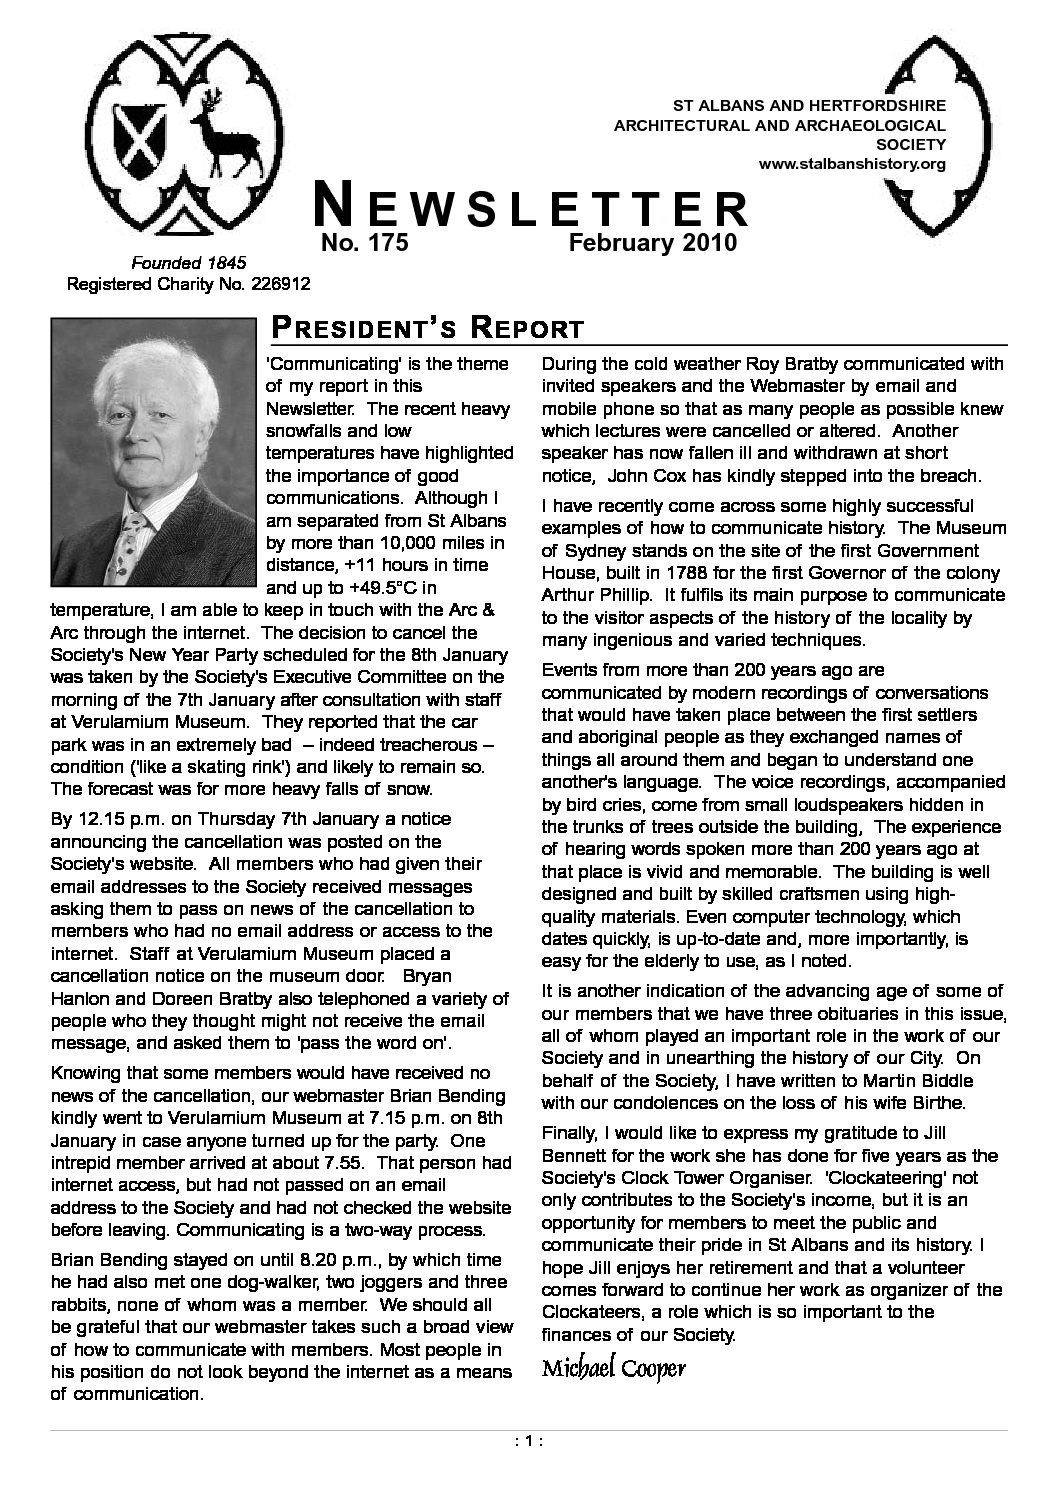 2010 Newsletters